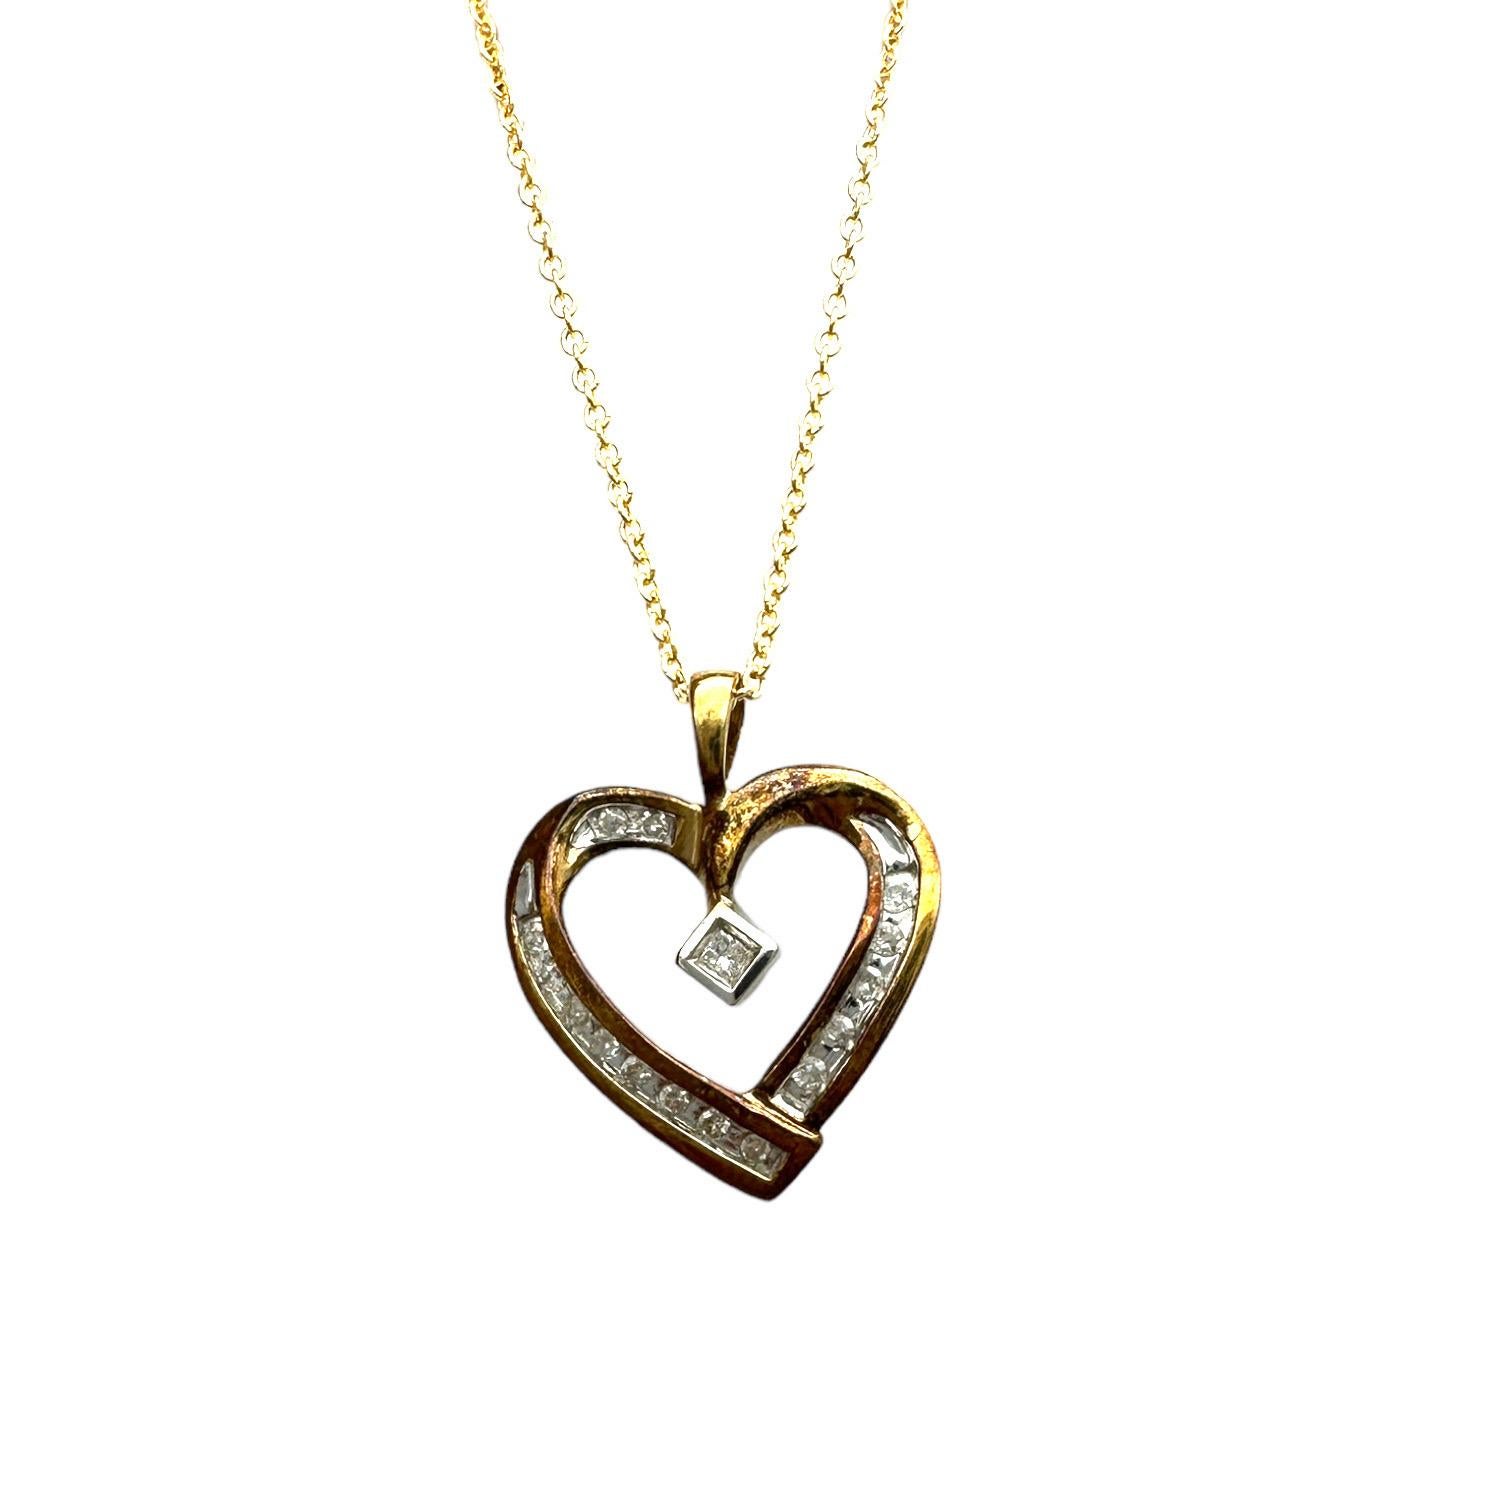 The 10-karat Yellow Diamond Heart and Chain is a stunning accessory for any occasion. It features a beautiful diamond heart pendant crafted from sterling silver and complemented by a shimmering 14K gold-plated chain. This elegant necklace is the